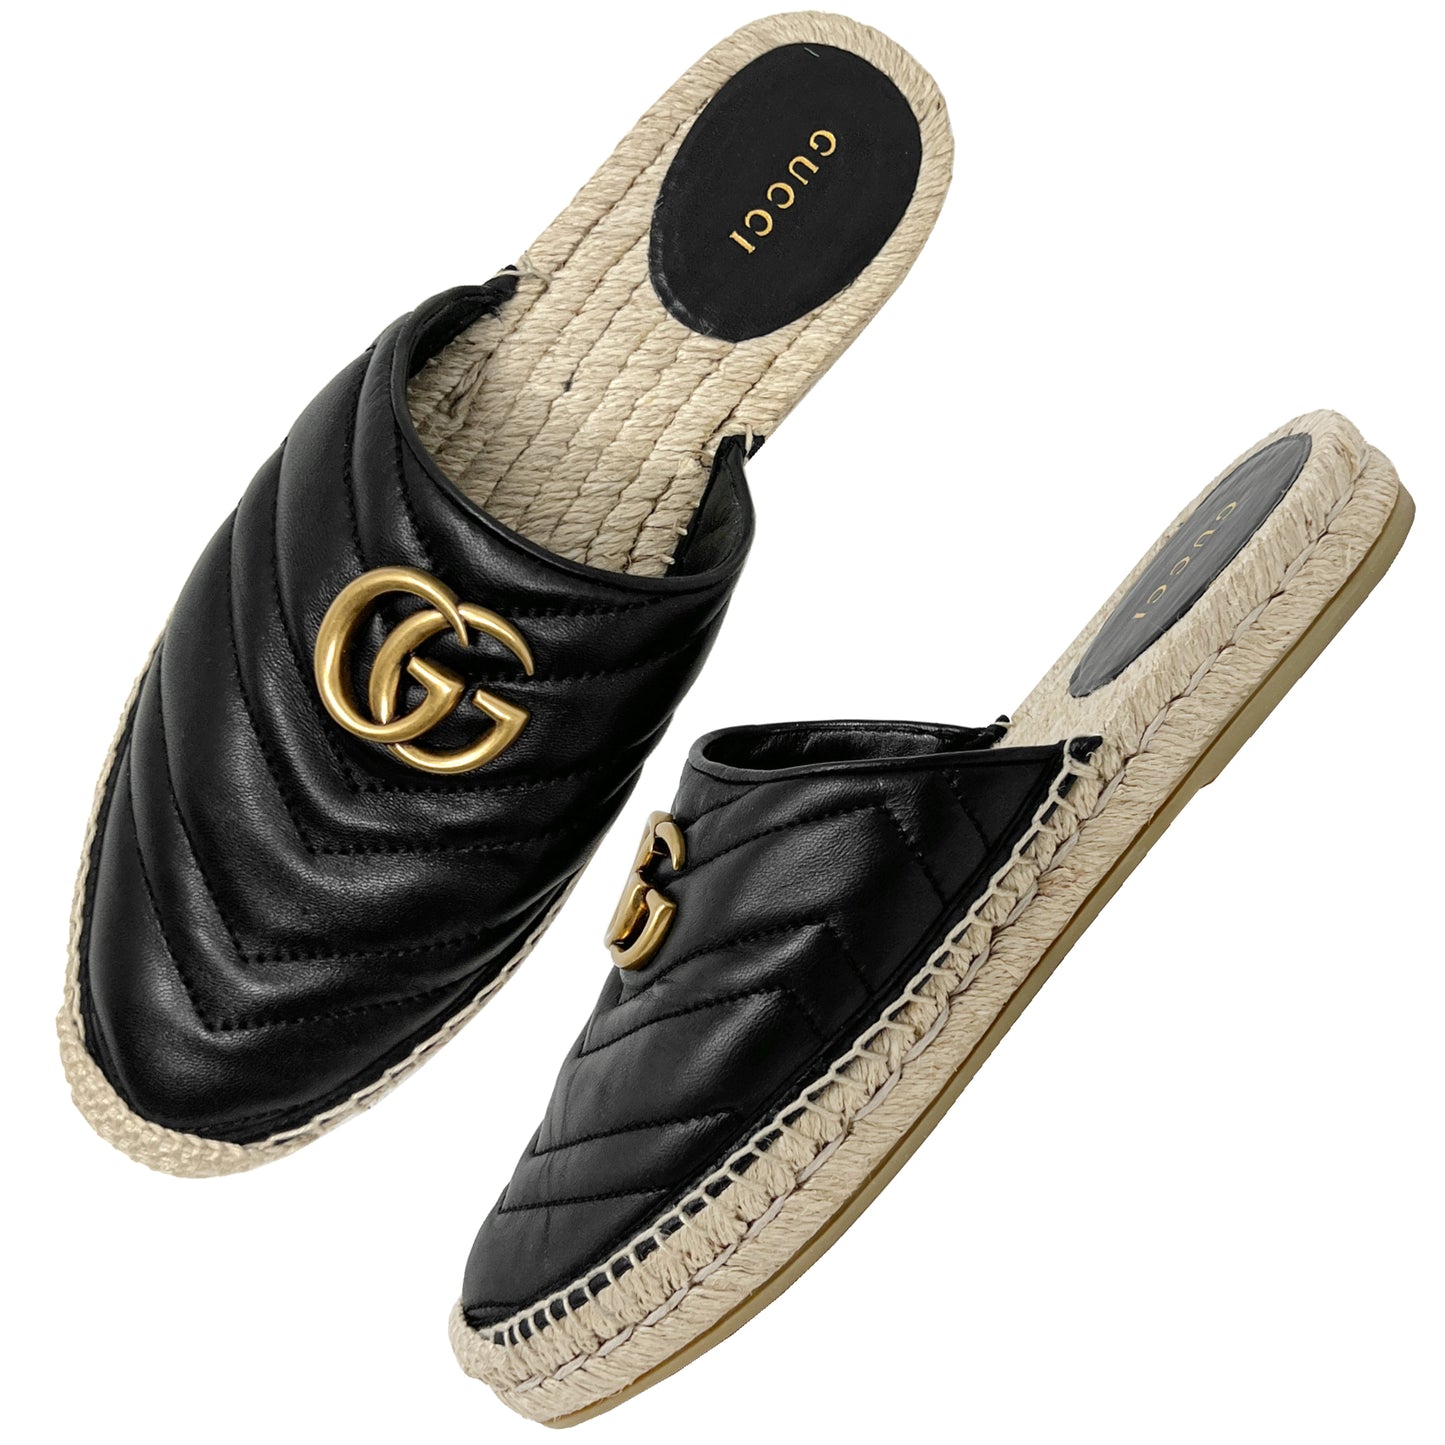 Gucci Marmont Black Chevron Quilted Black Leather Espadrilles Flats Mules